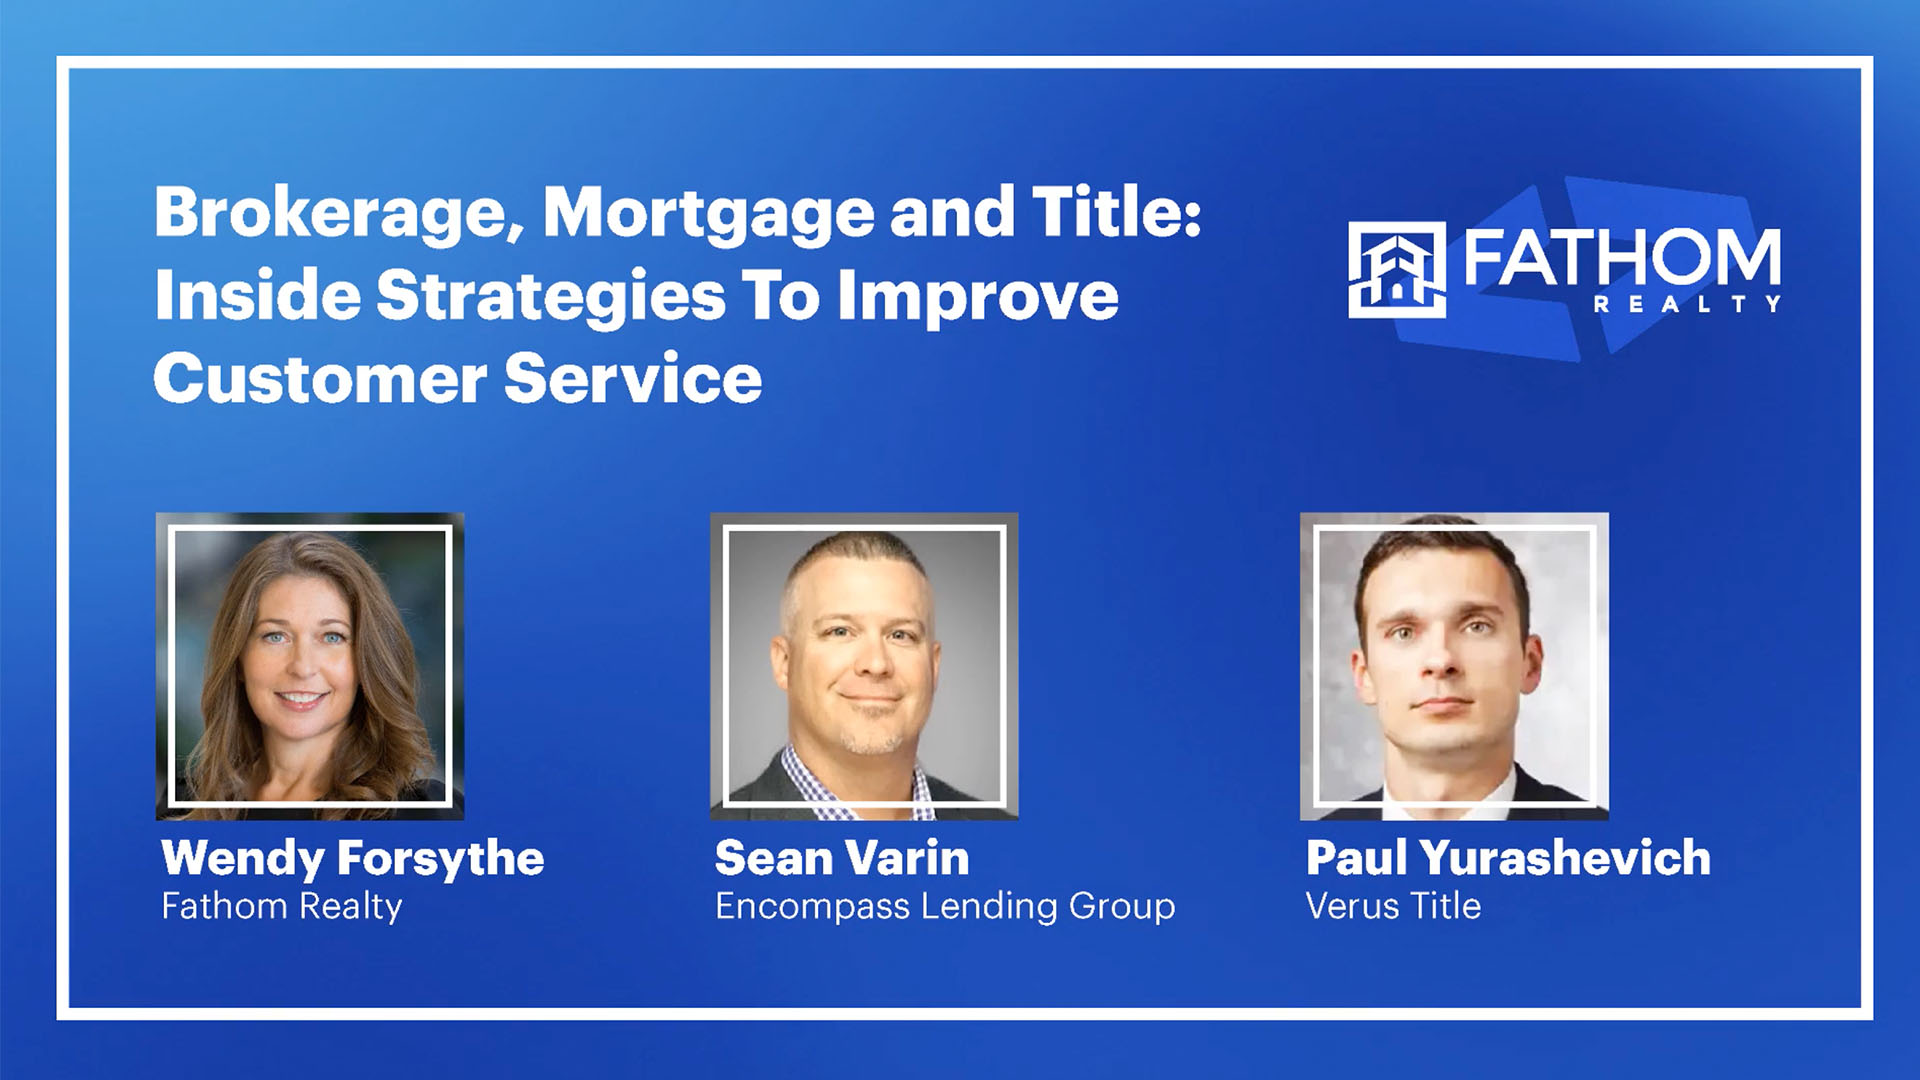 Featured image for “Brokerage, Mortgage, and Title: Inside Strategies to Improve Customer Service”